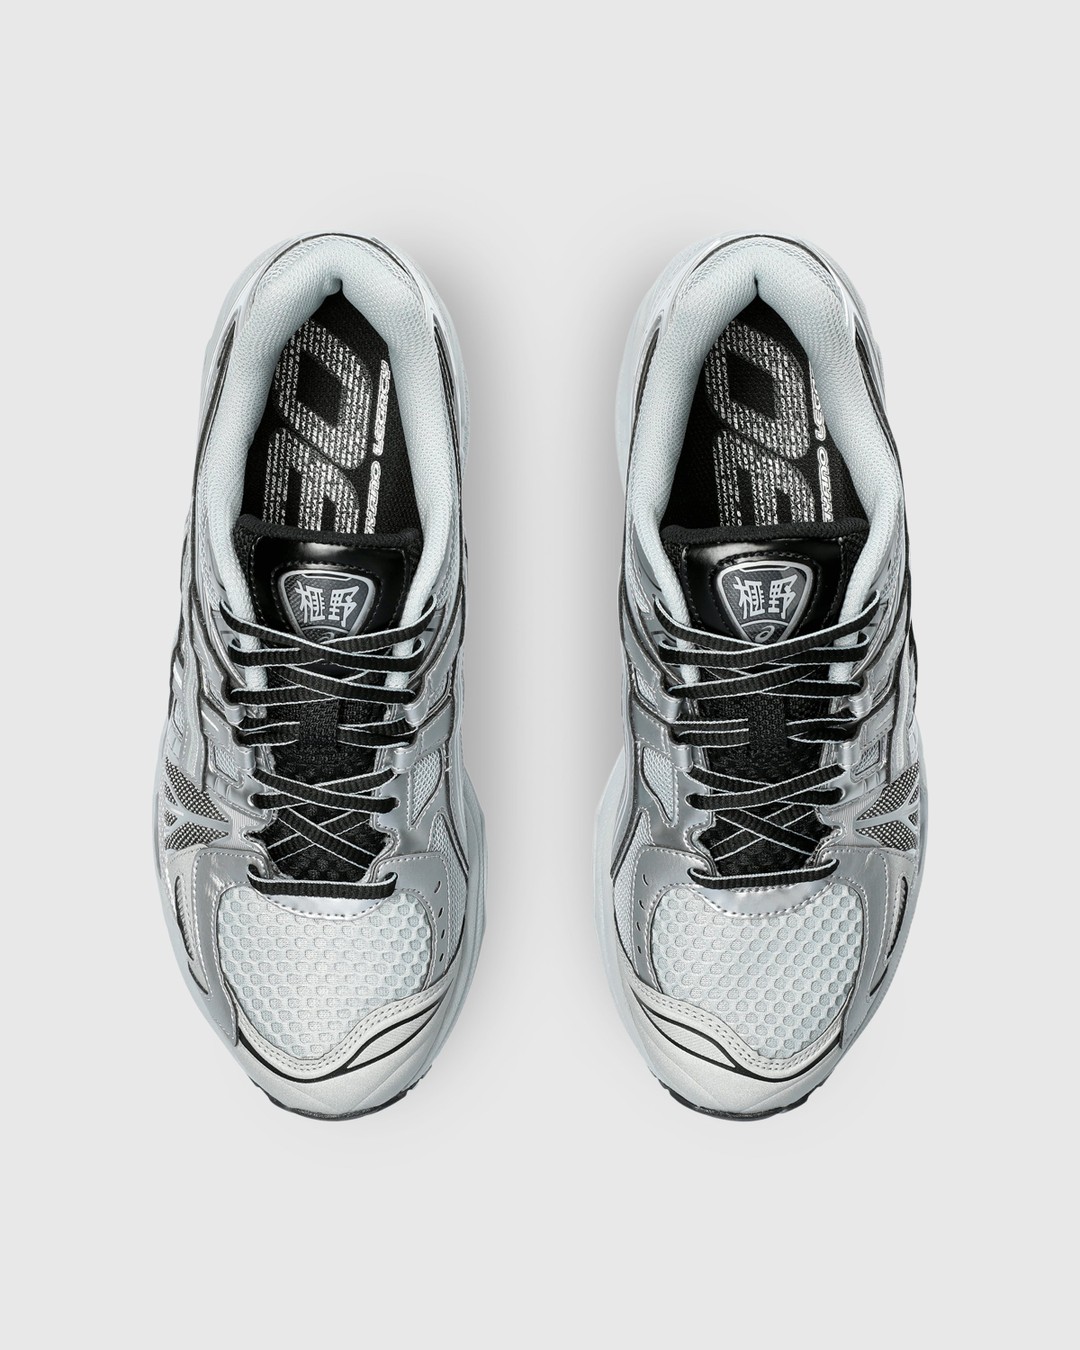 asics – GEL-KAYANO 14 Pure Silver/Pure Silver | Highsnobiety Shop